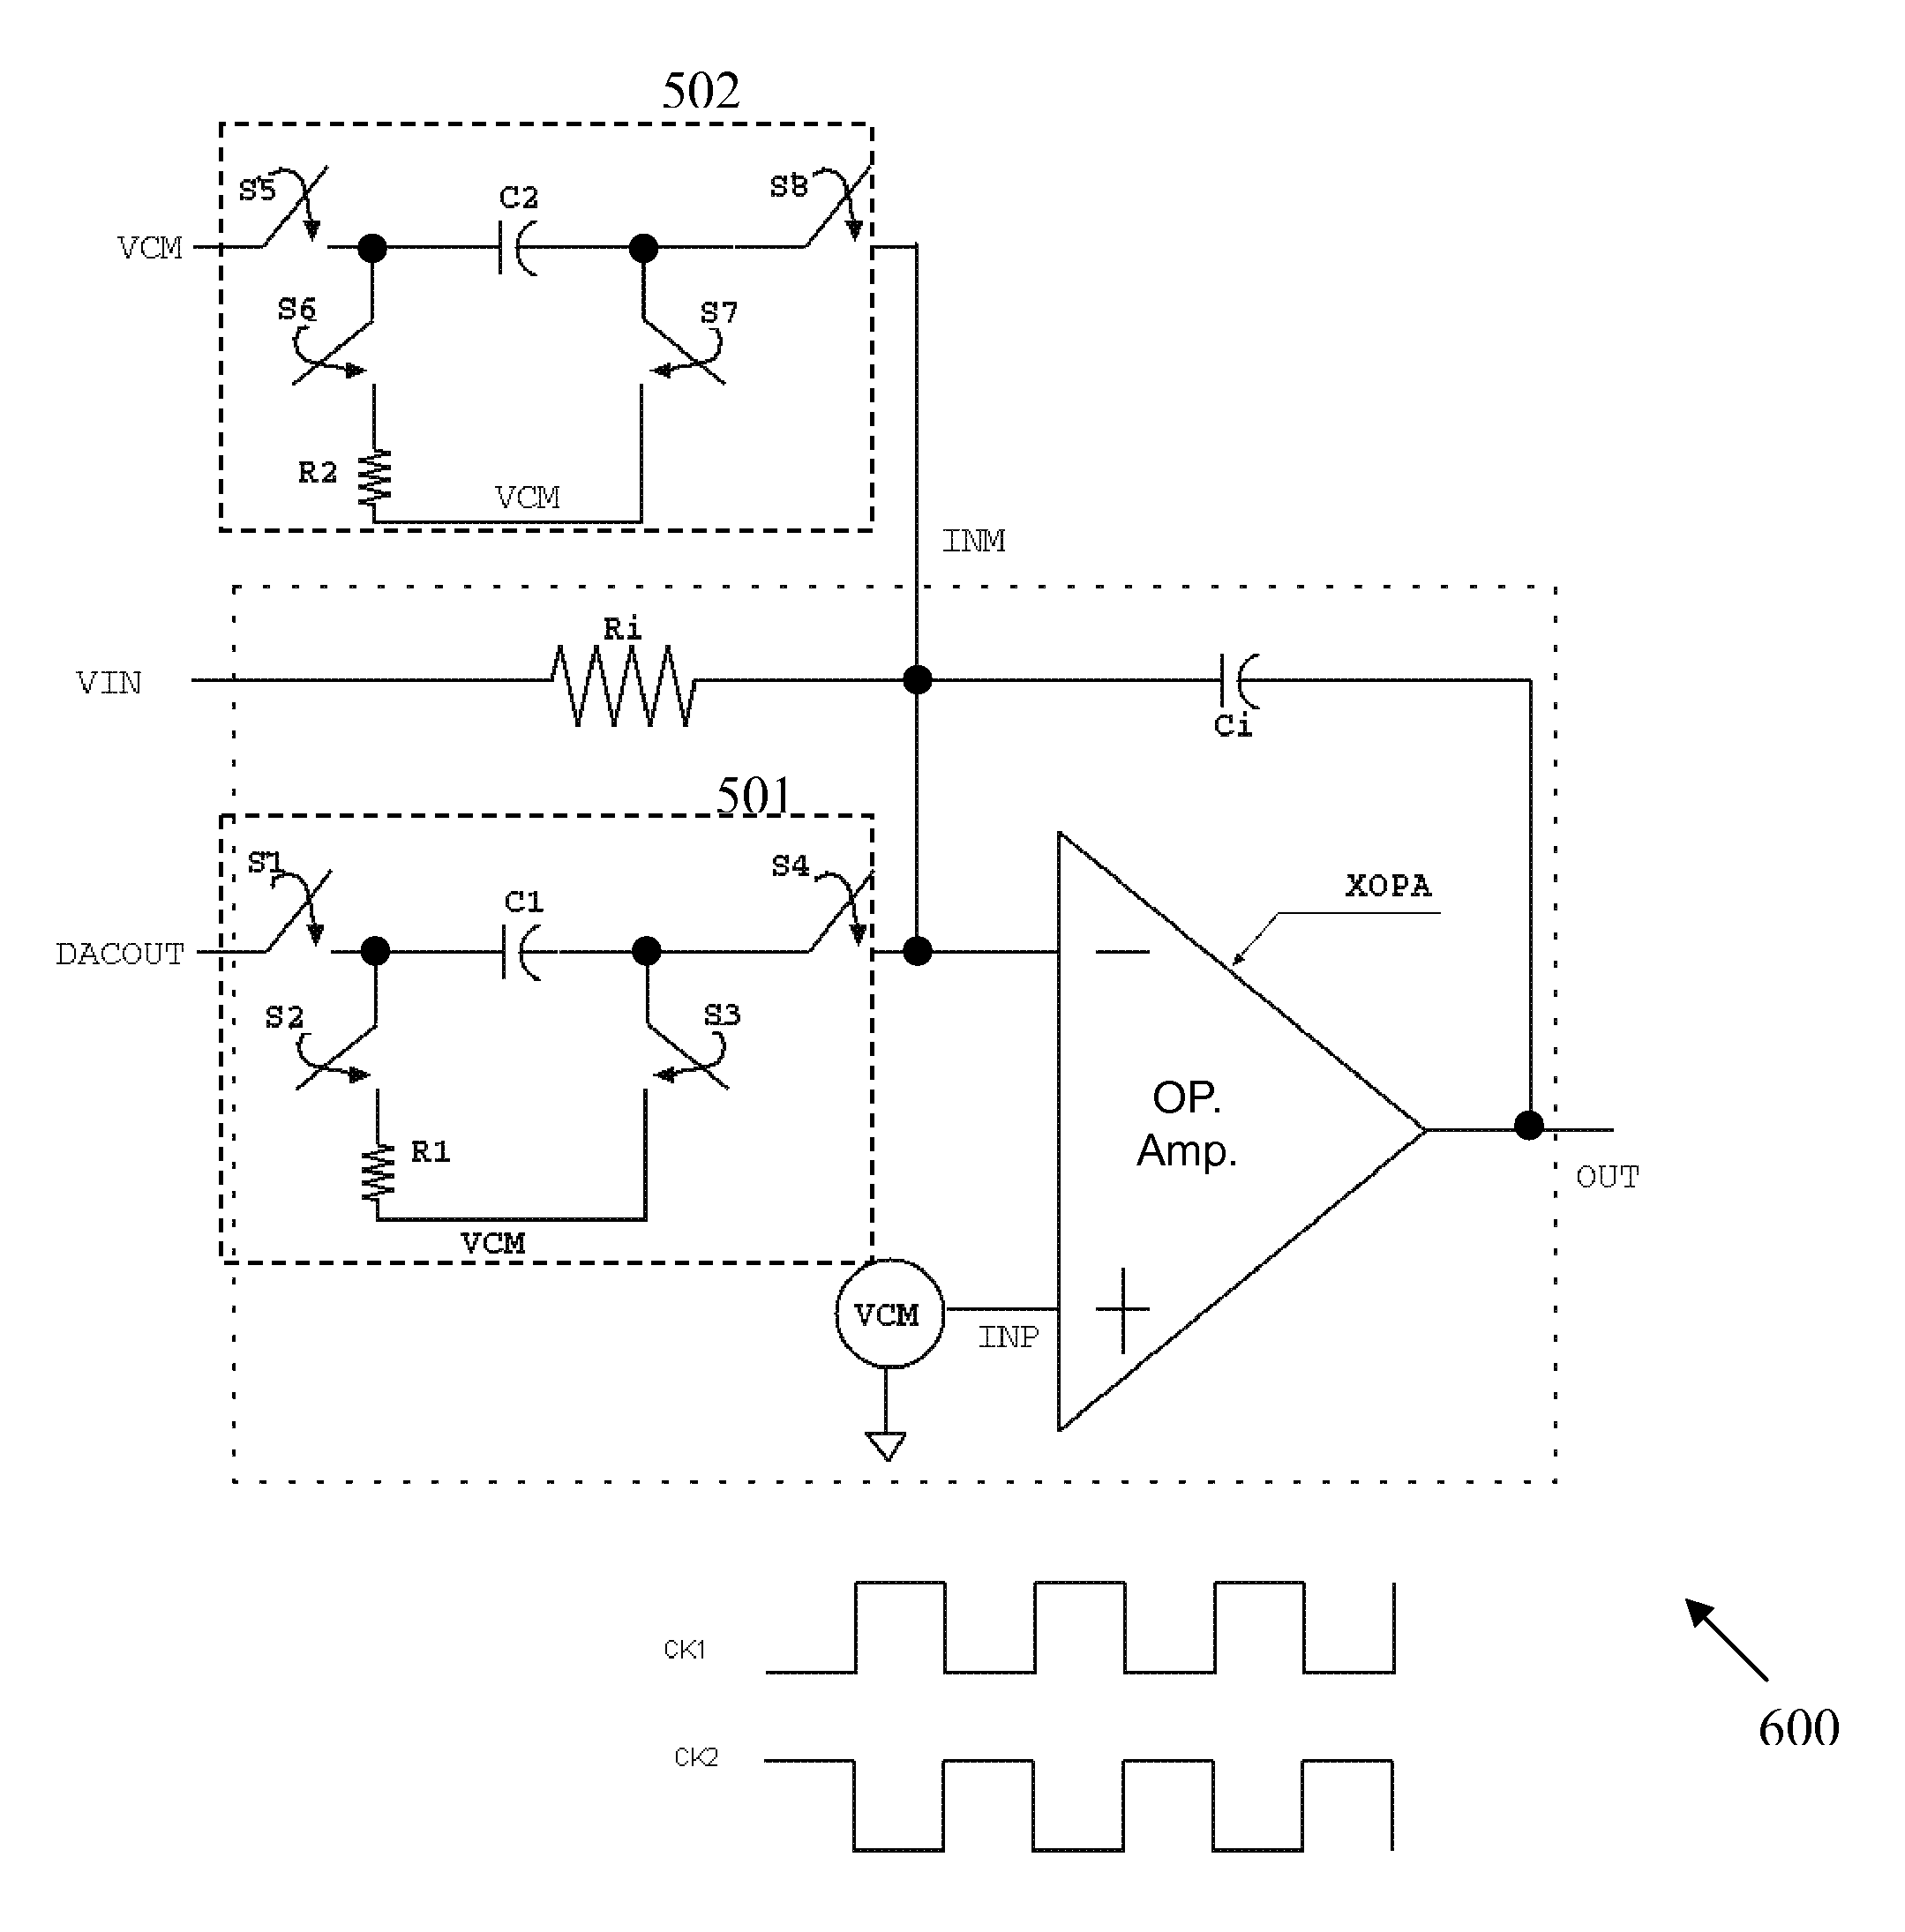 Switched charge storage element network